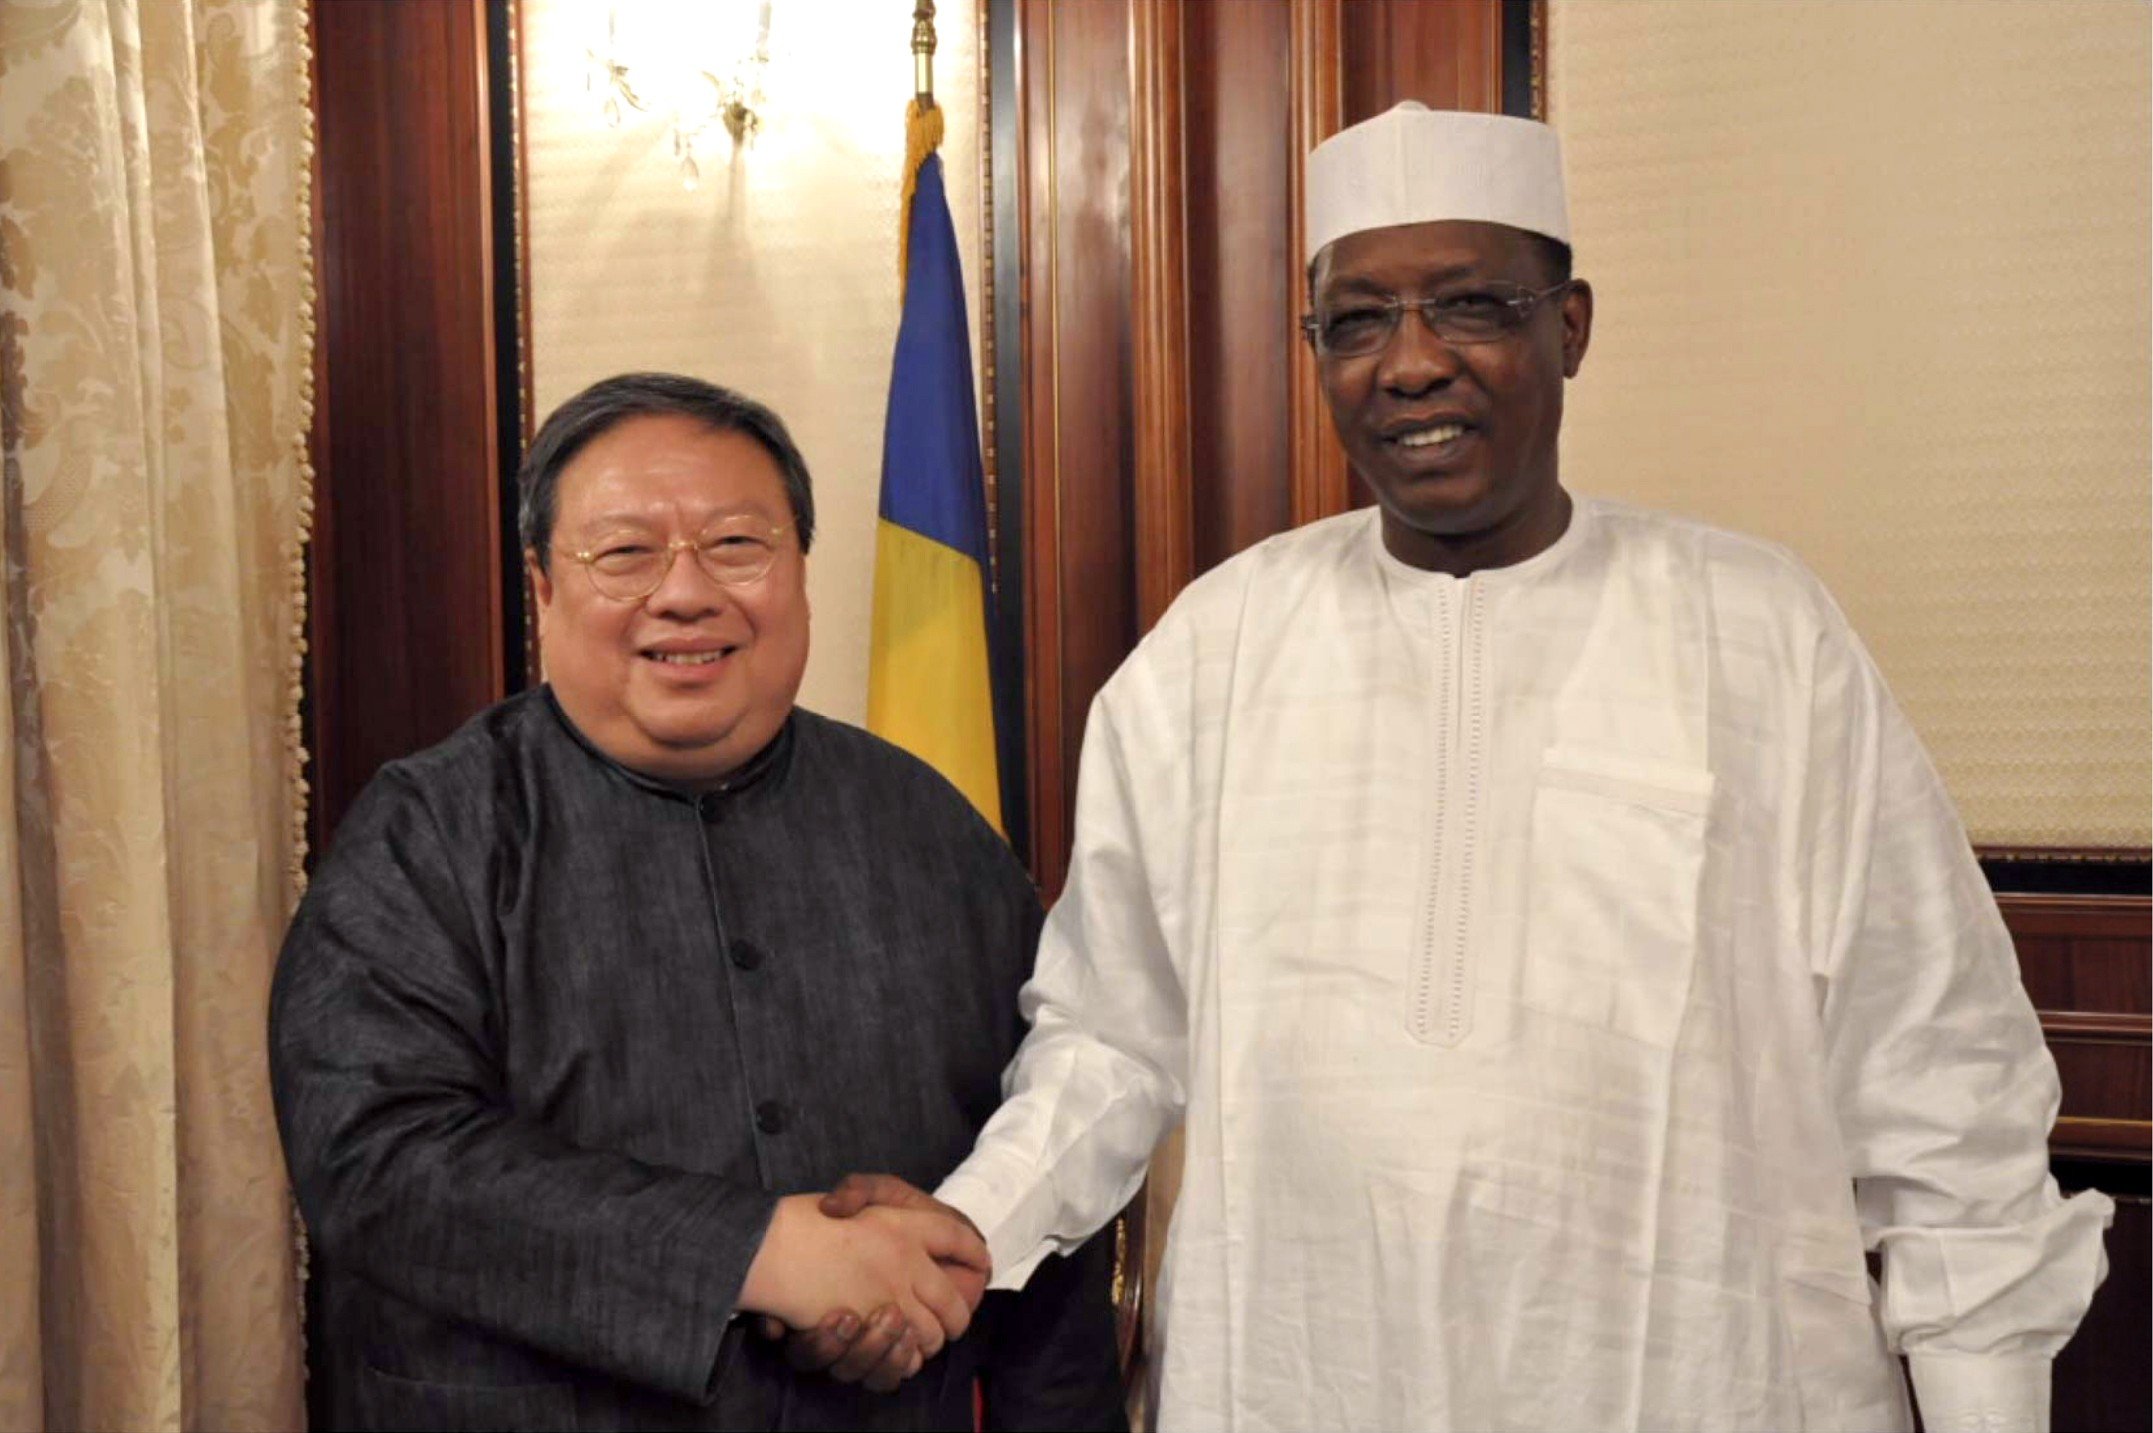 Patrick Ho led a CEFC Chinese Energy delegation to meet Chadian President Iris Deby in November 7, 2014. One month later in the second visit, Ho brought along eight boxes stuffed with cash. Photo: Handout